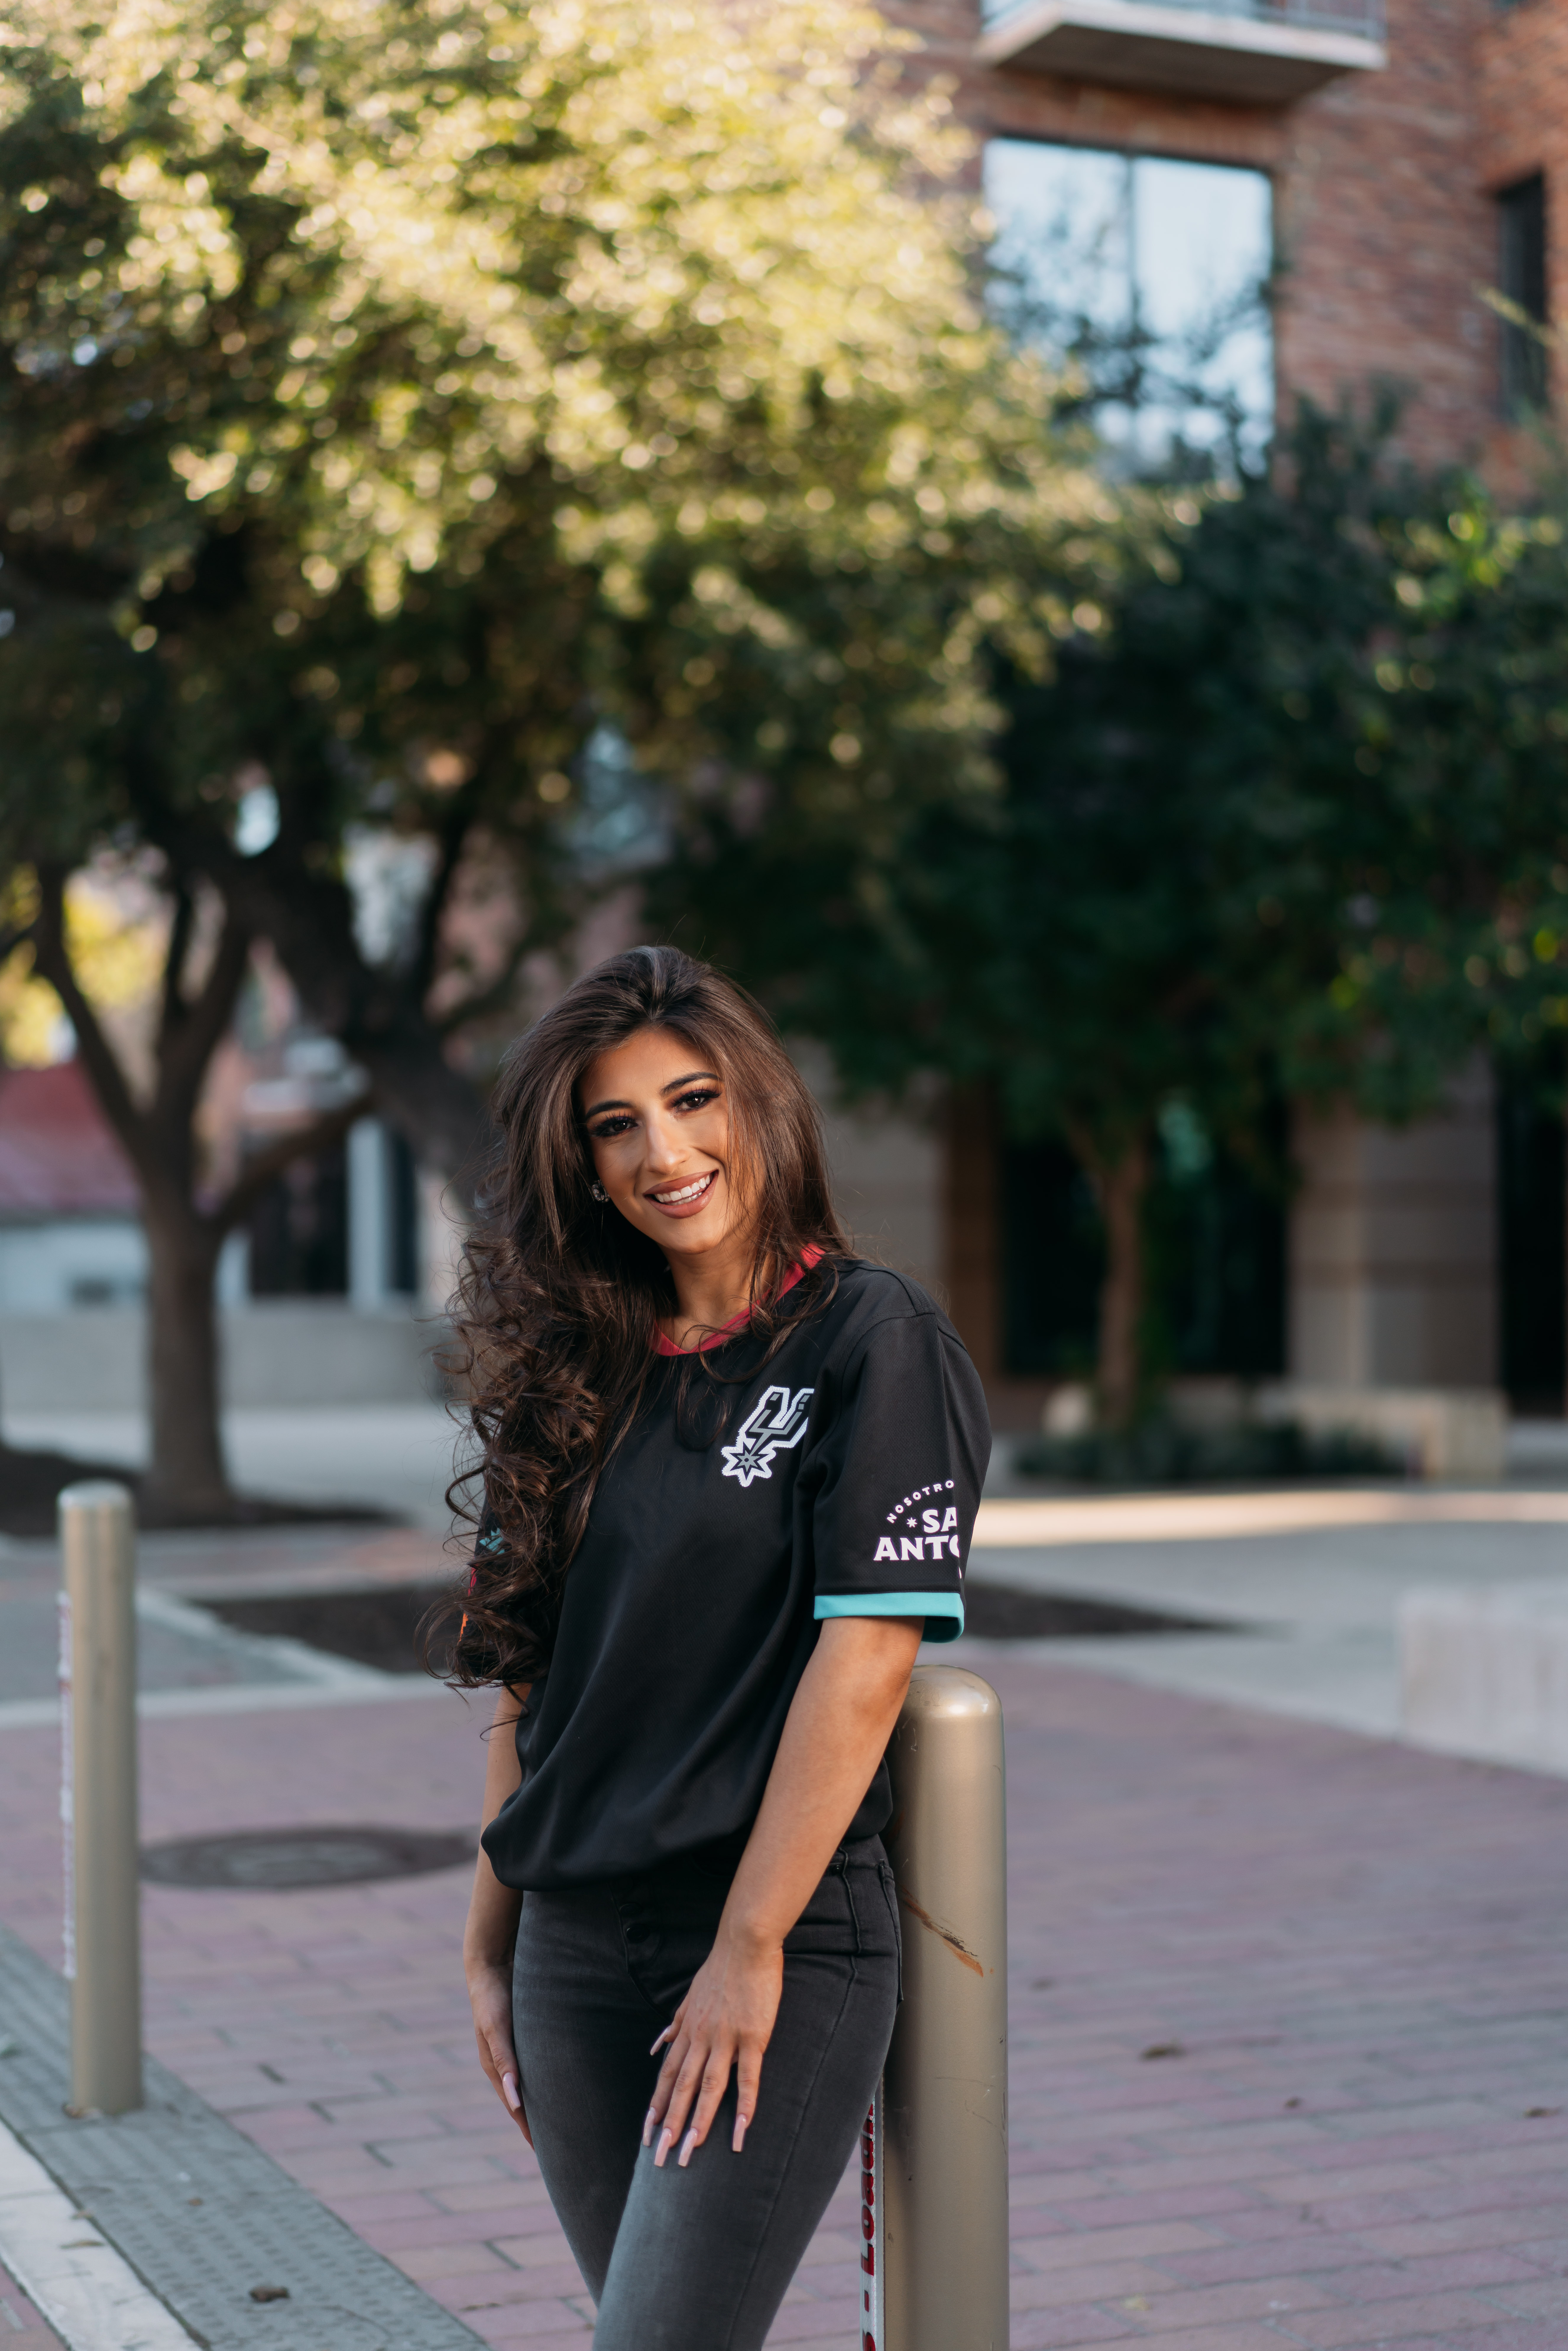 Spurs' new 'La Cultura' clothing line additions are here and are